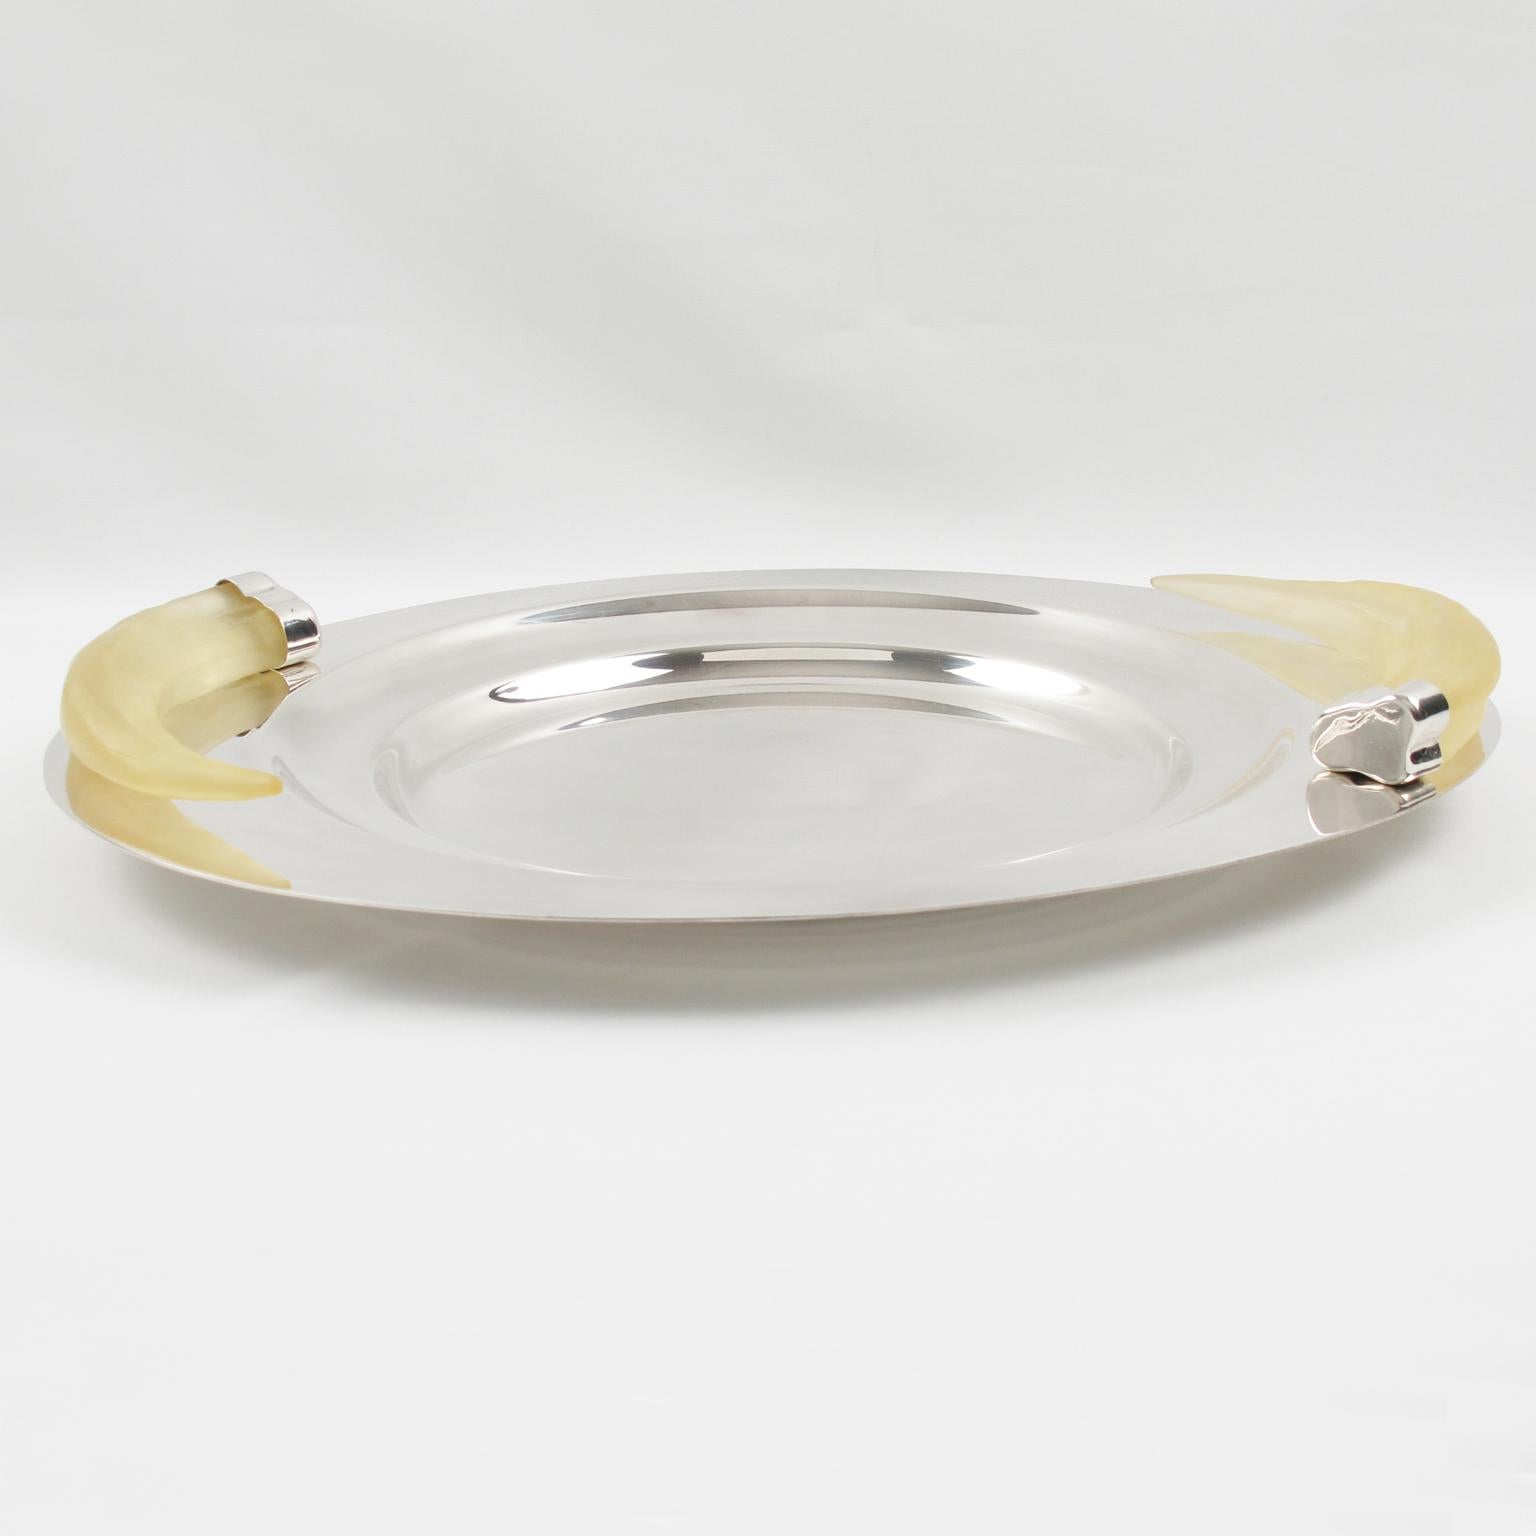 Brazilian Prata Wolff Silver Plate Platter Tray Centerpiece with Lucite Horn Handles For Sale